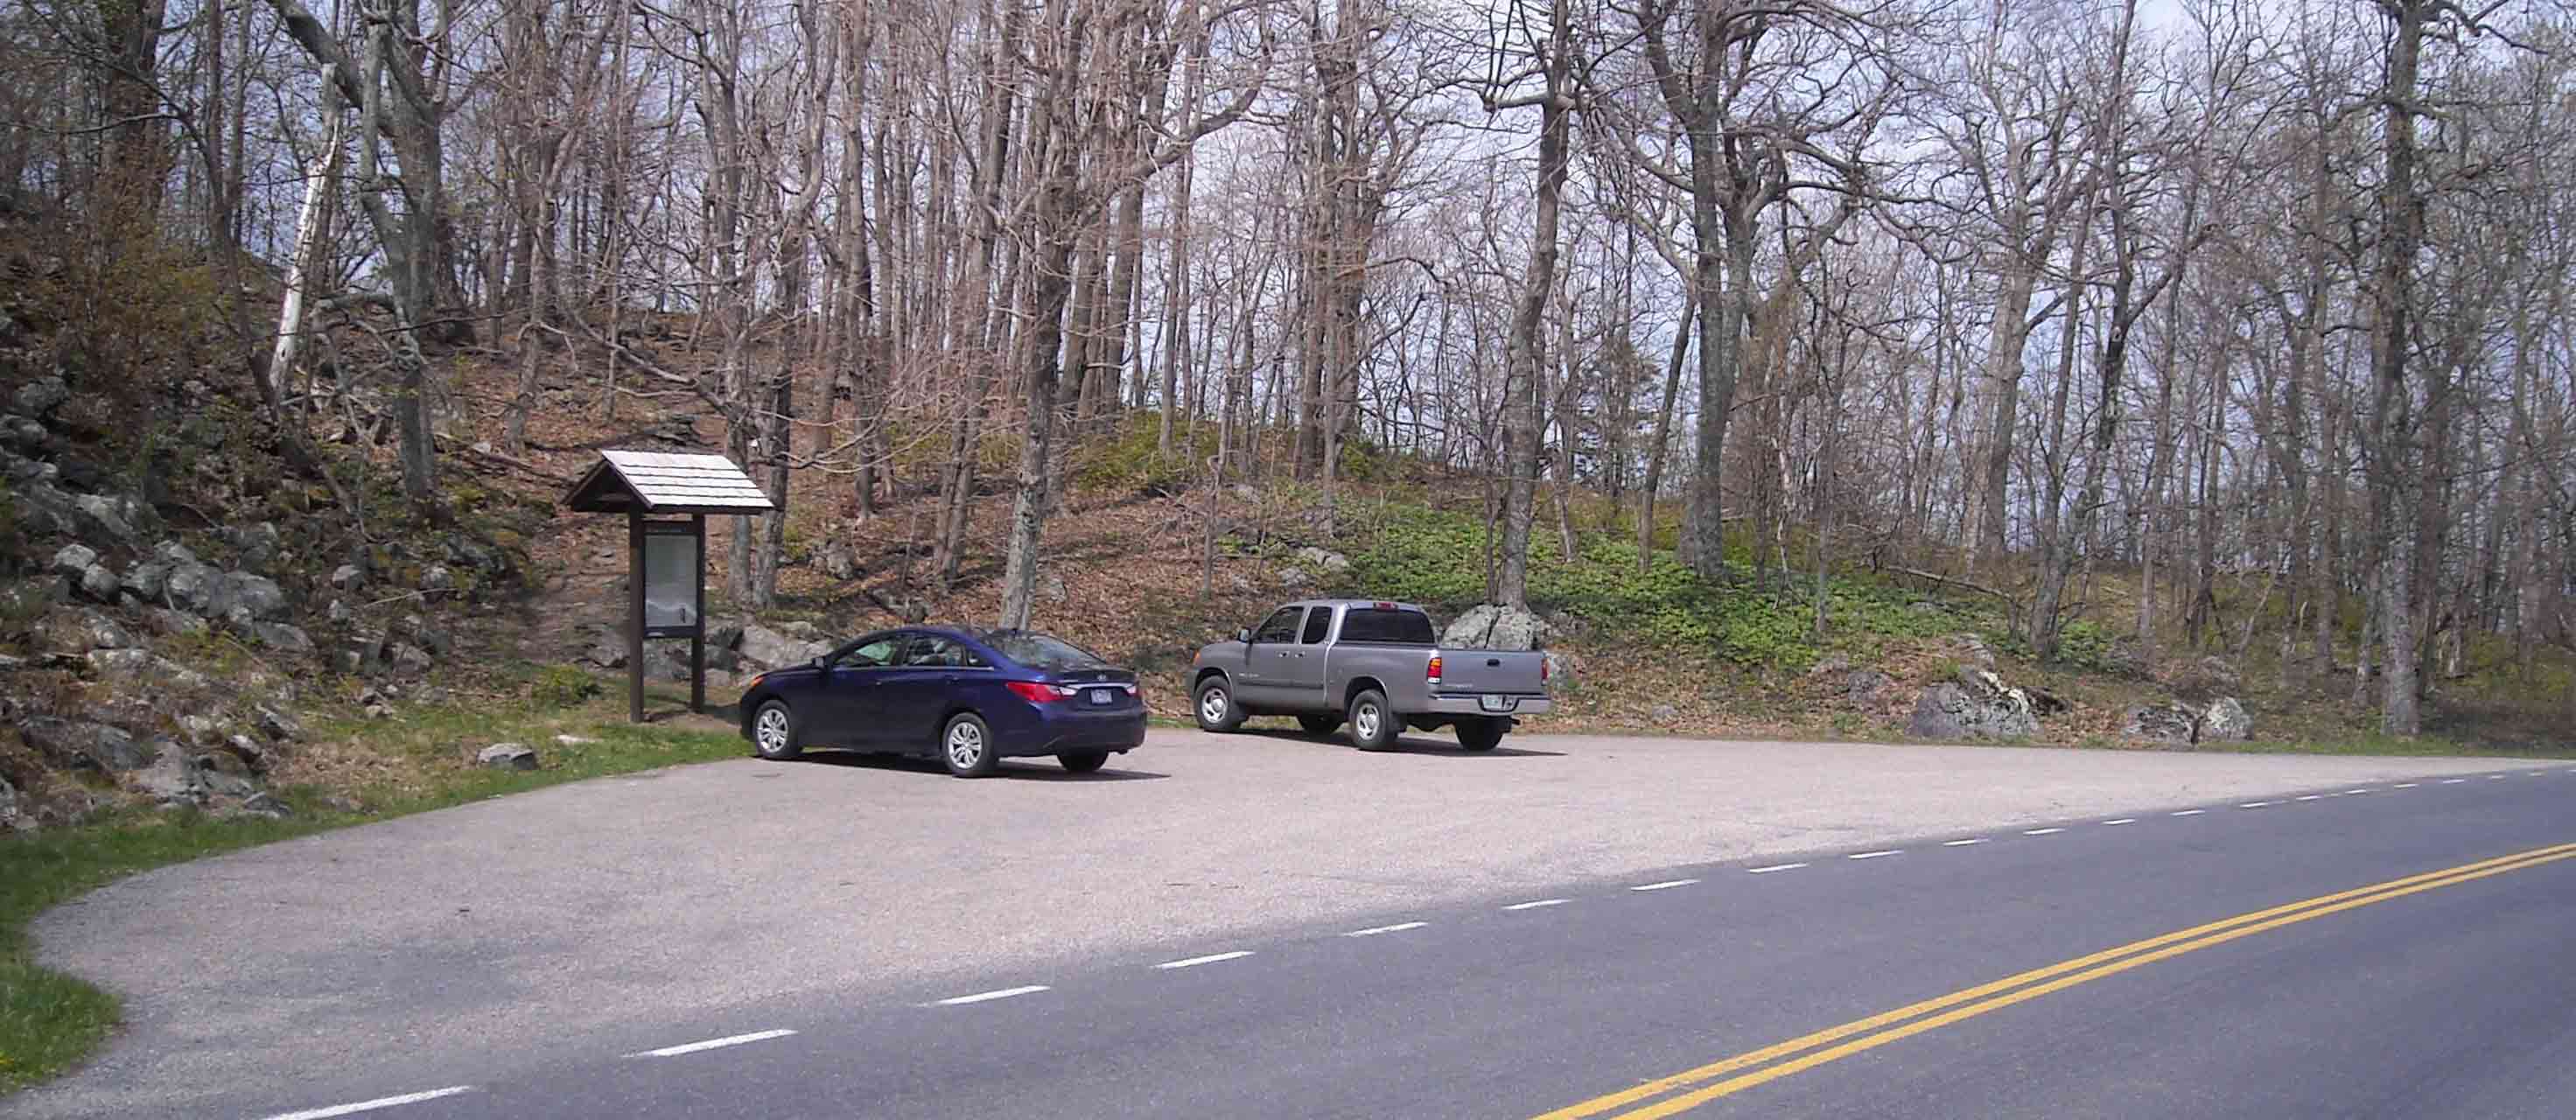 mm 7.9 - Parking area for trail to Little Stony Man Viewpoint, which is part of the AT. Sign in photo has out-dated map showing Passamaquoddy Trail as part of the AT - watch the blazes instead.  Courtesy MalteseCross@Comcast.net